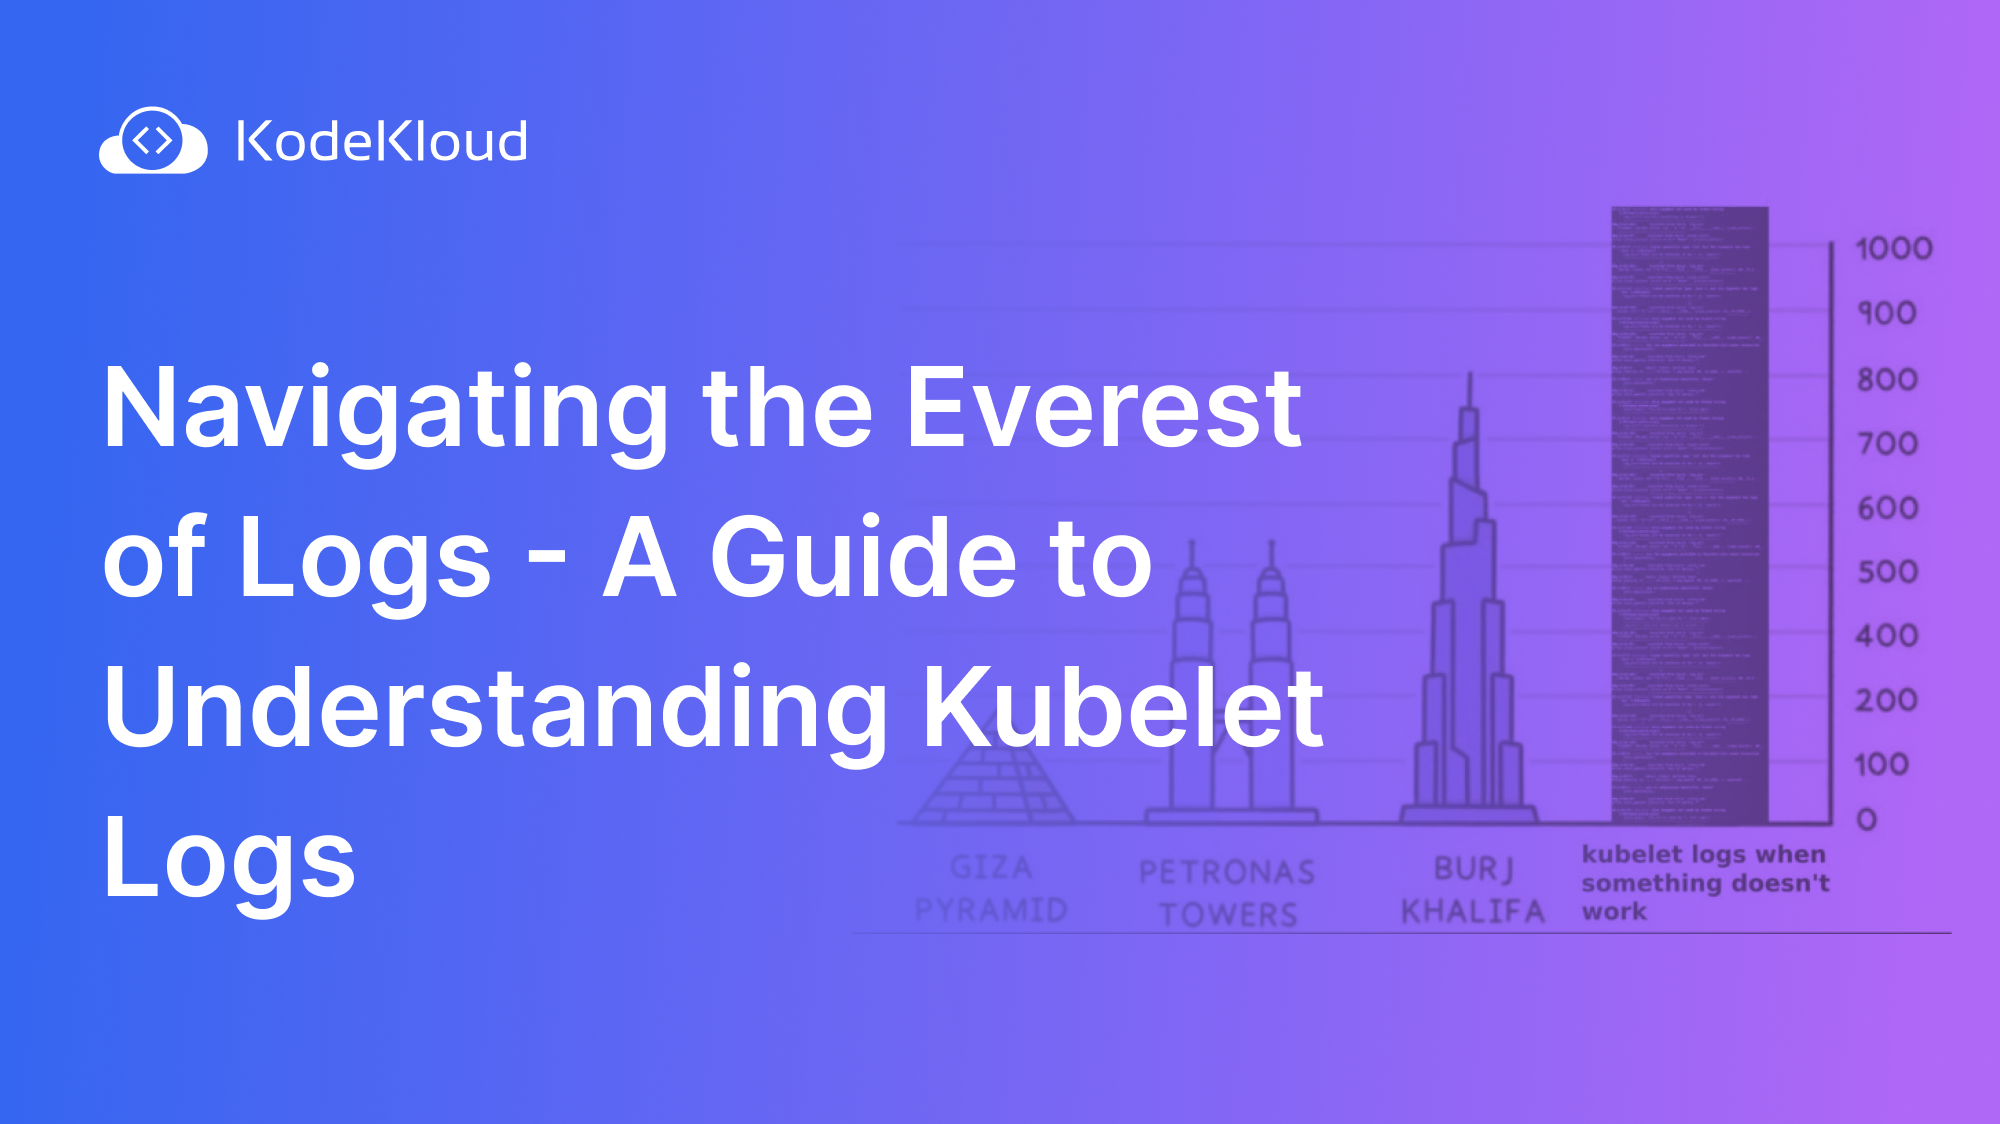 Navigating the Everest of Logs - A Guide to Understanding Kubelet Logs